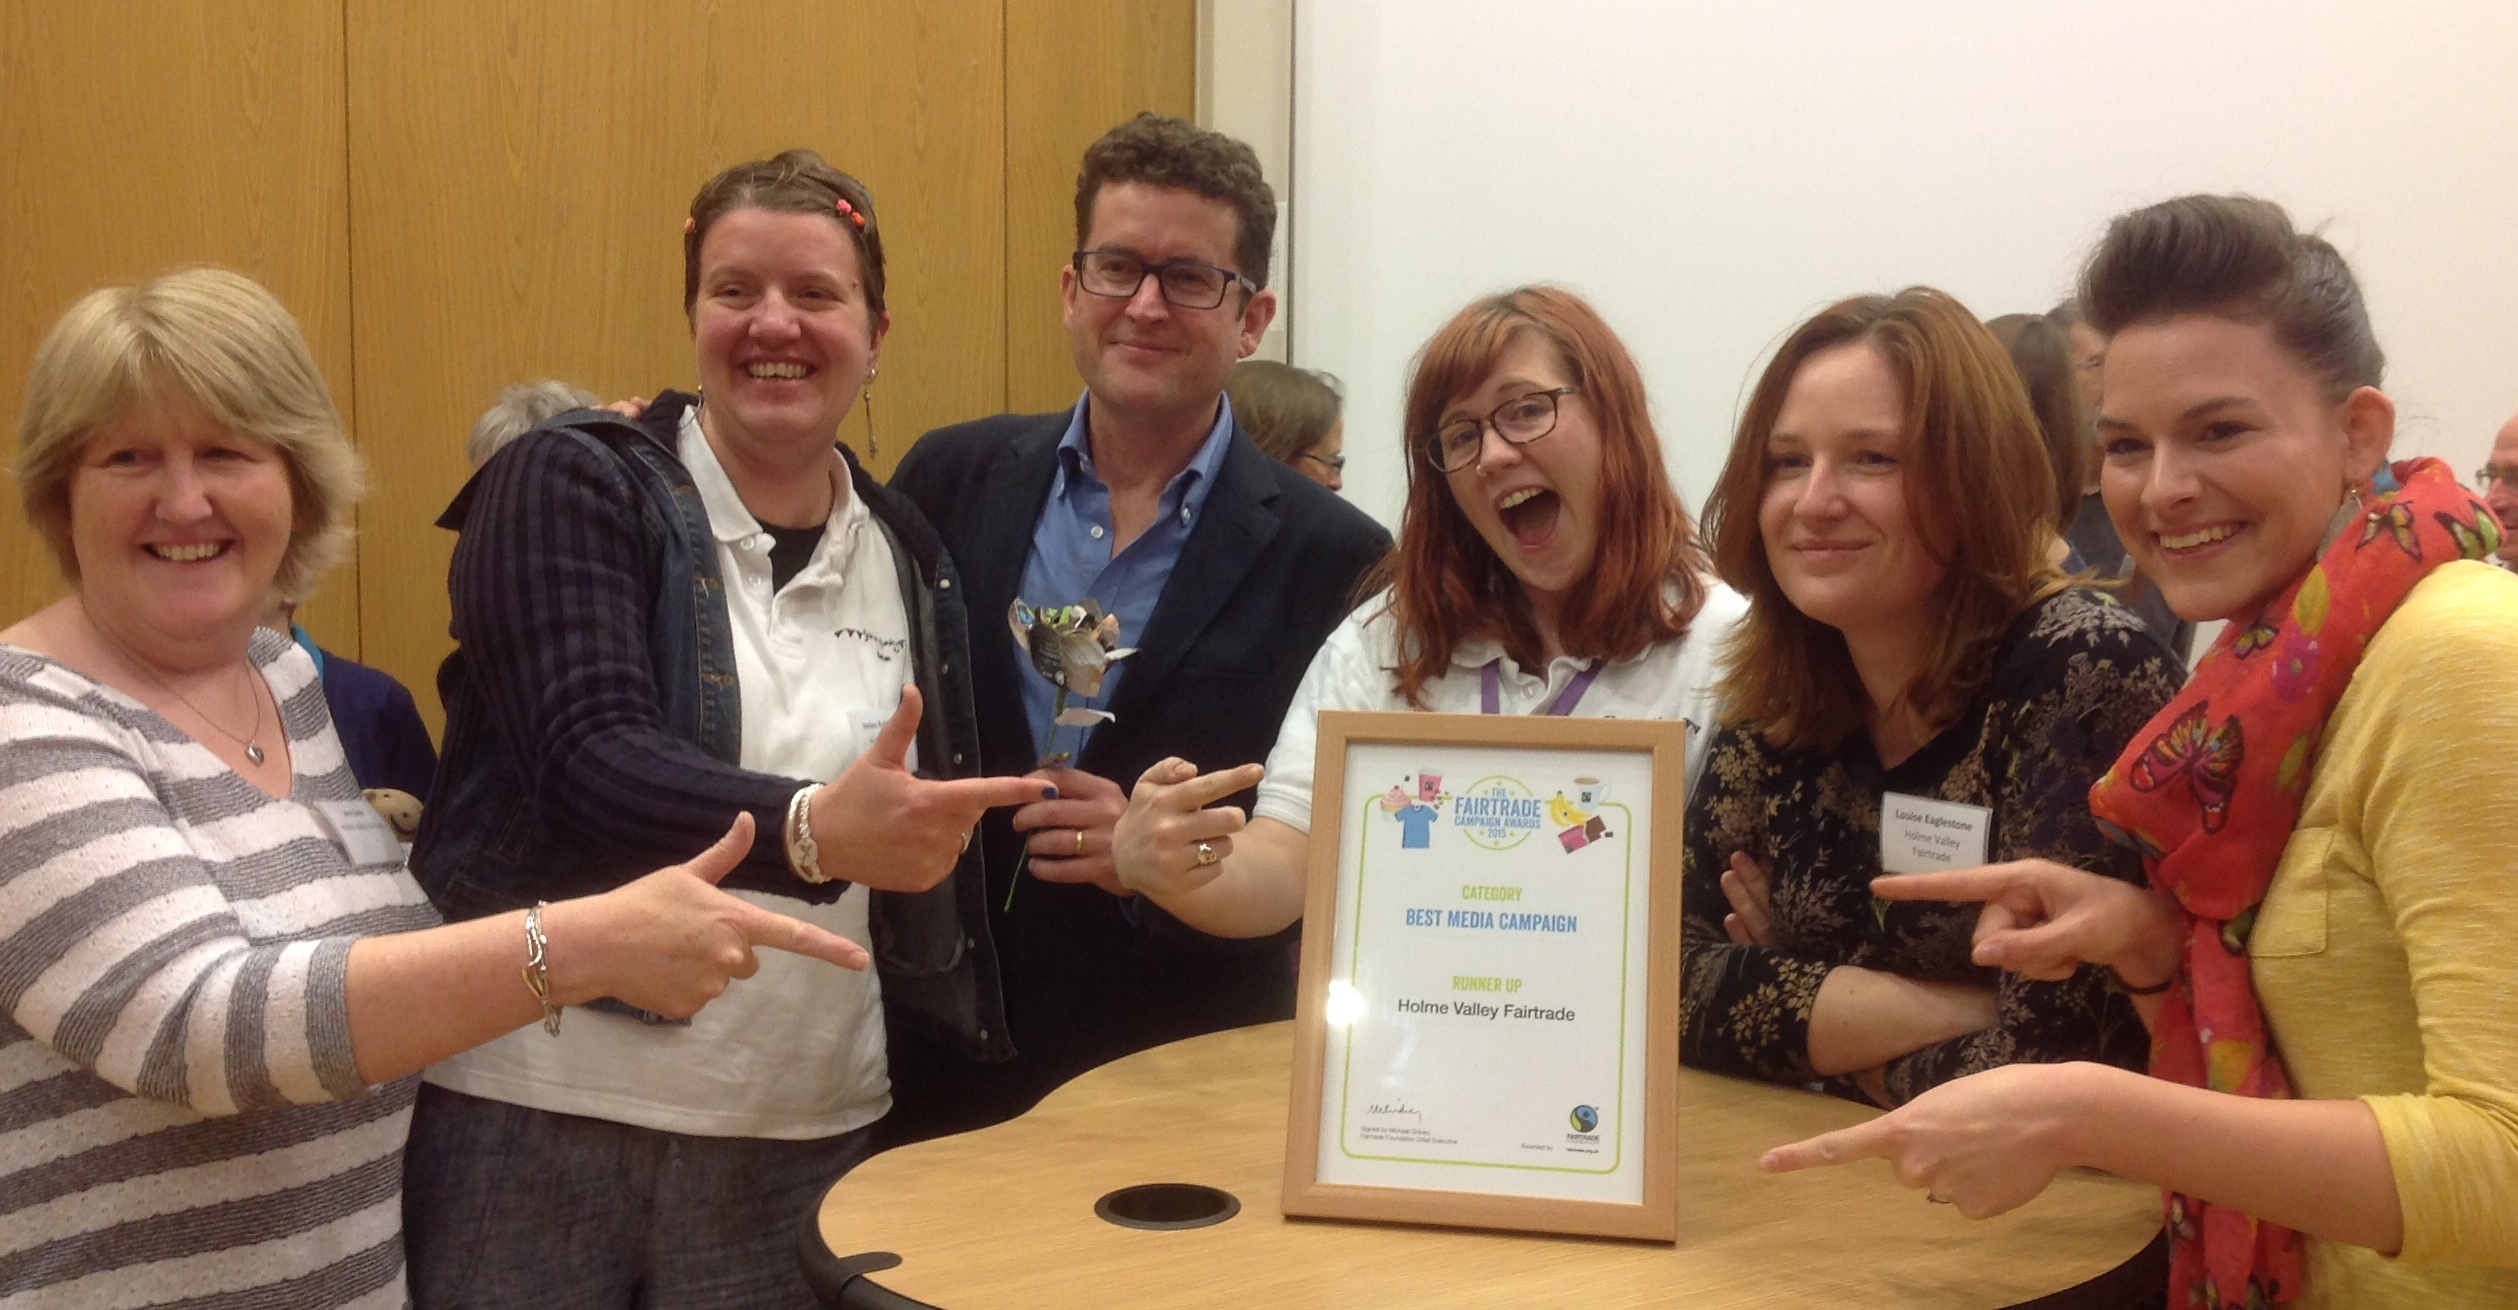 National Fairtrade Supporters Conference 2015 - Holme Valley Fairtrade - Runners Up for Best Media Campaign Award